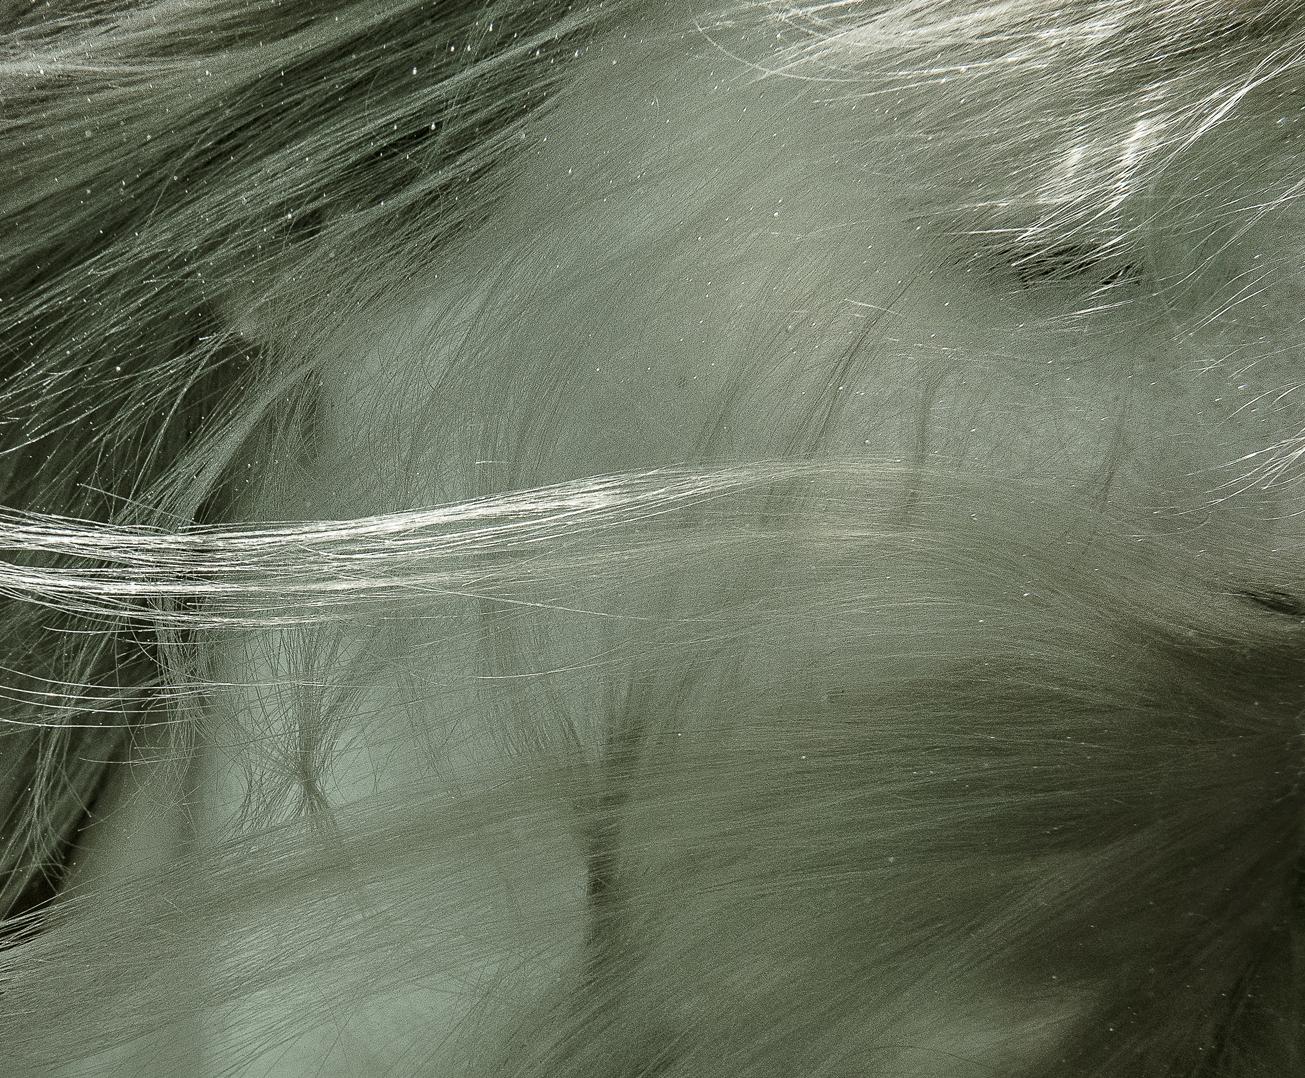 An underwater photograph of a young woman with long golden hair. The hair covers the woman's face making this figurative photograph look like an abstract art.

Original gallery quality archival pigment print on metallic paper signed by the artist.